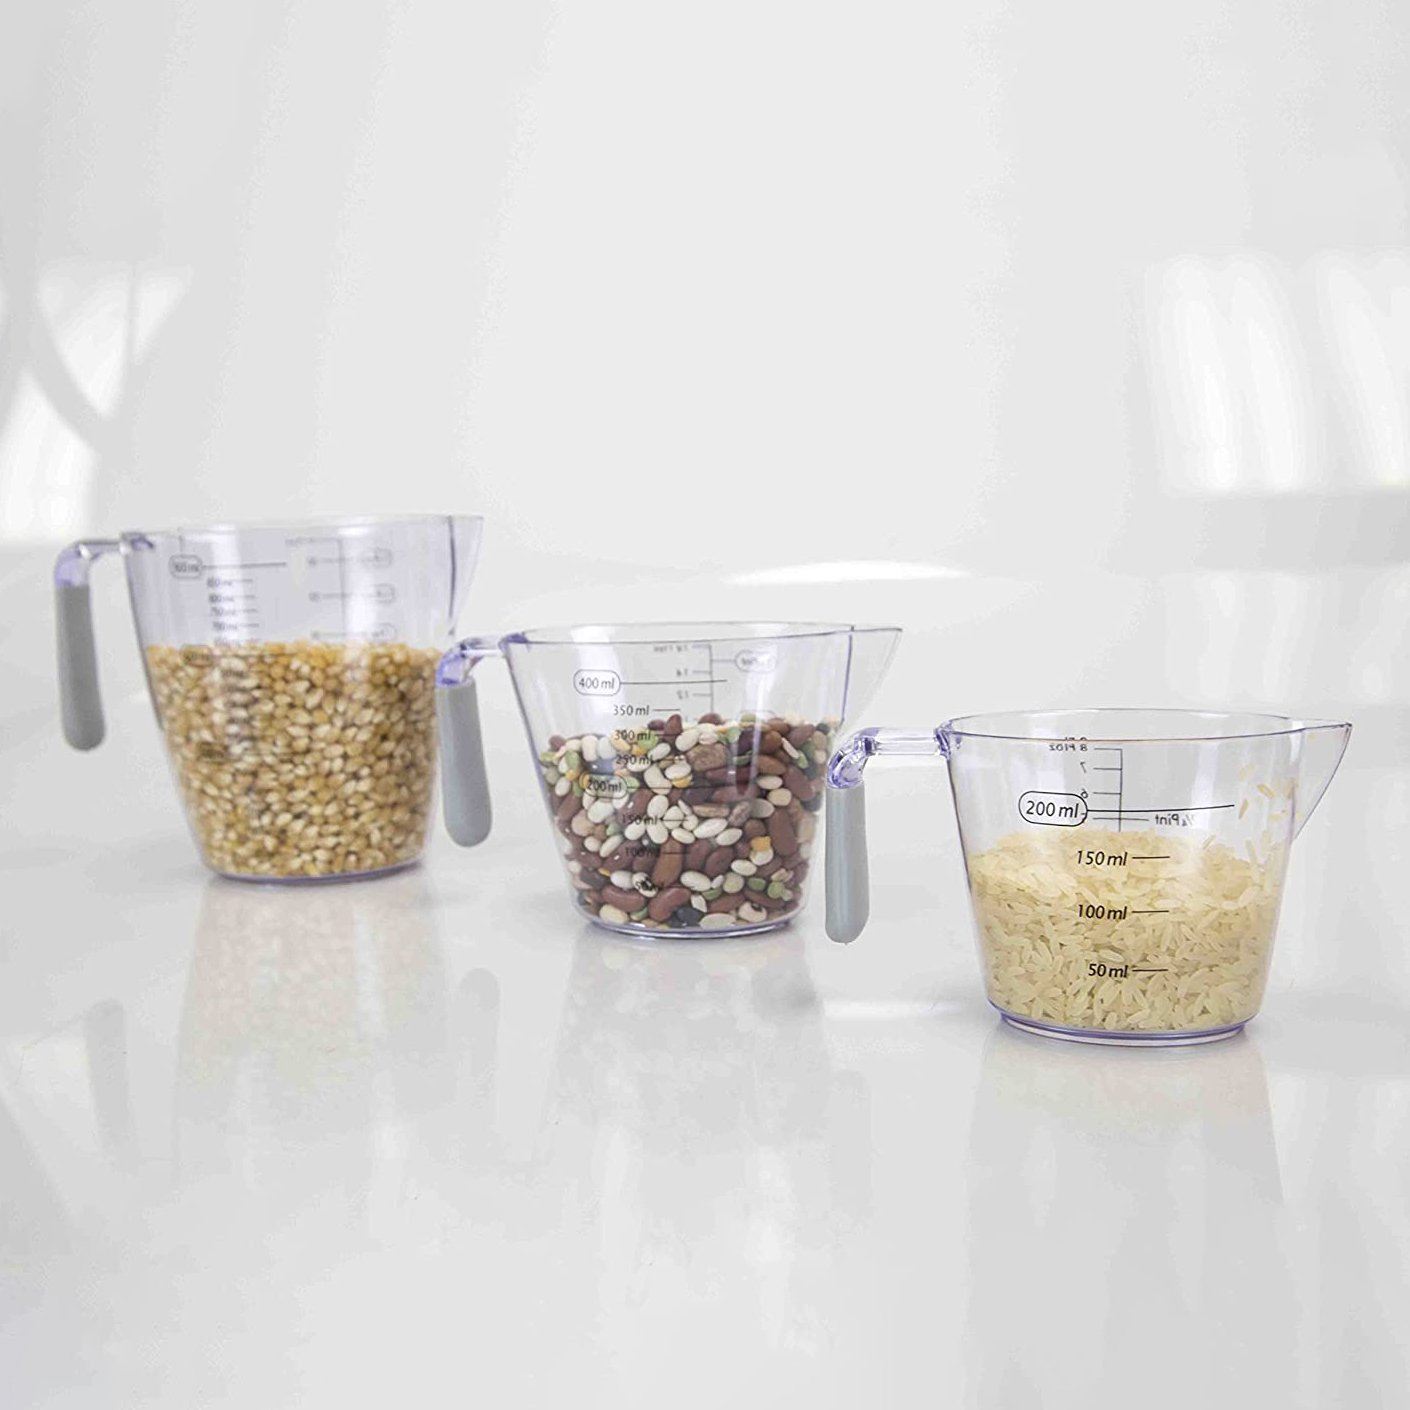 https://dailysale.com/cdn/shop/products/3-piece-home-basics-clear-plastic-measuring-cup-set-with-rubber-grip-handles-kitchen-dining-dailysale-324036.jpg?v=1607148954